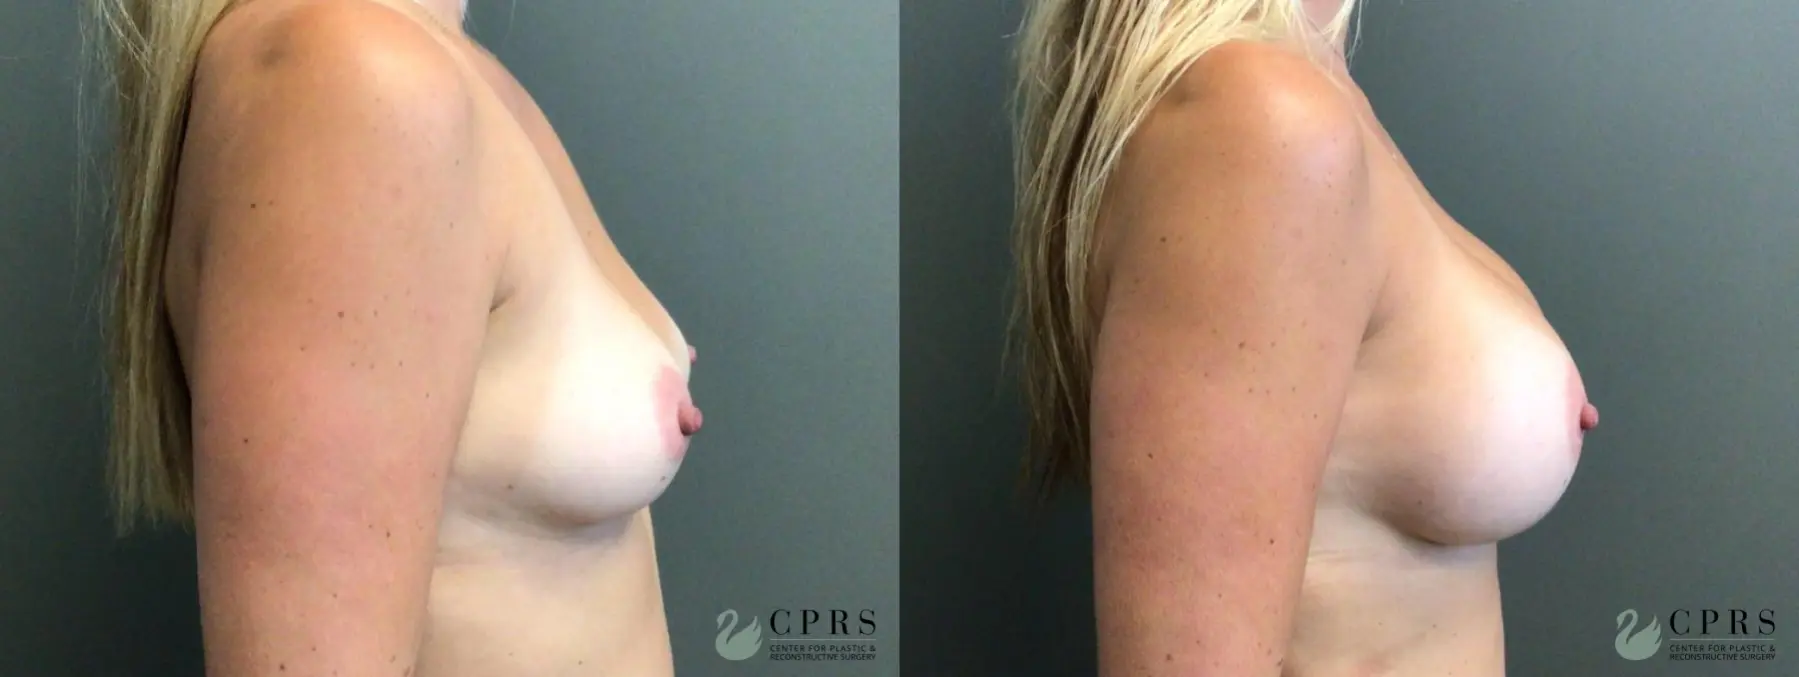 Breast Augmentation: Patient 15 - Before and After 2